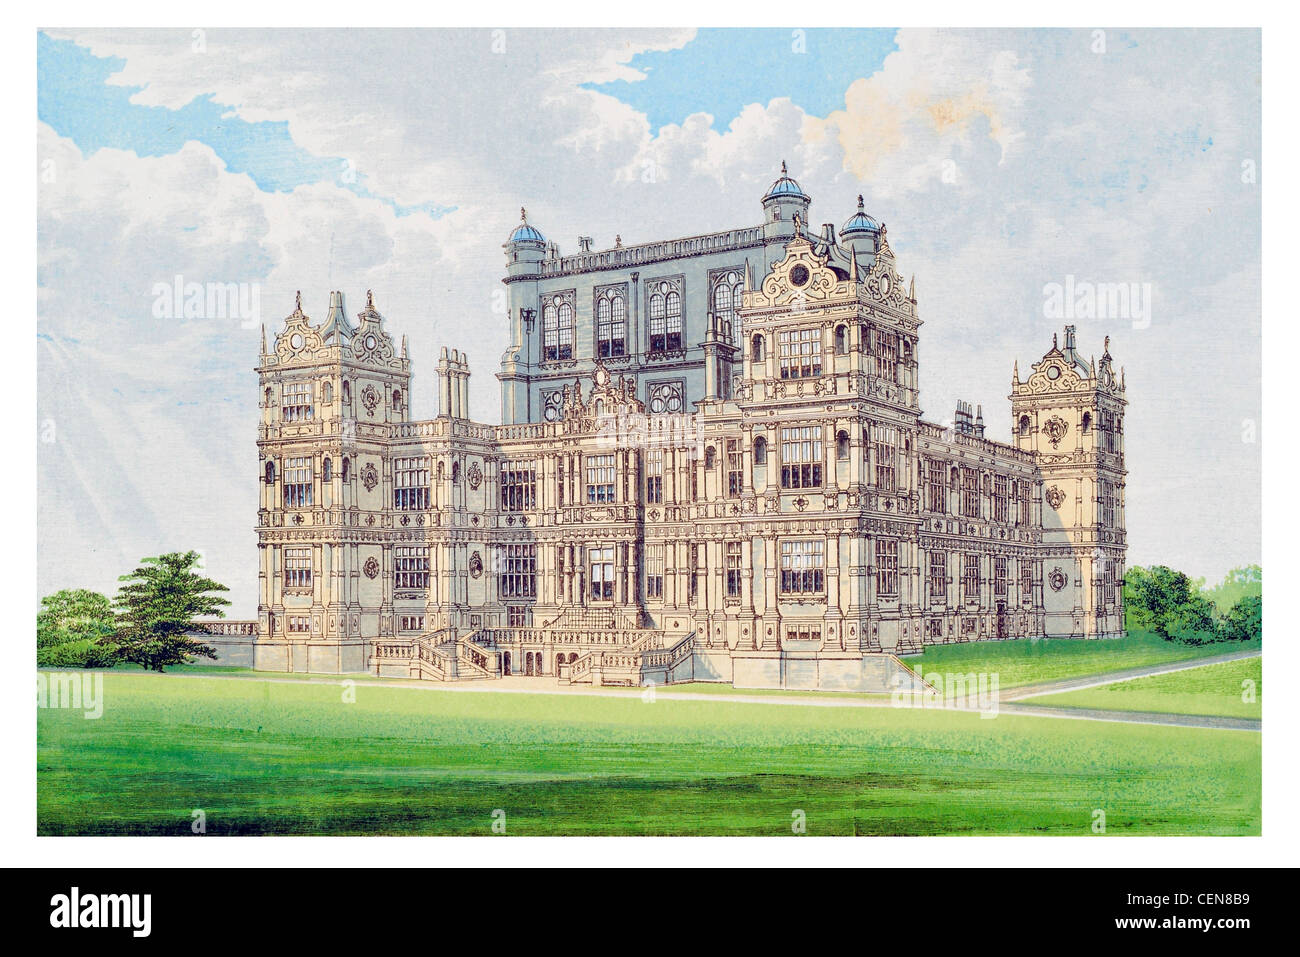 Wollaton Hall country house standing Nottingham England natural history museum Elizabethan Jacobean Stock Photo